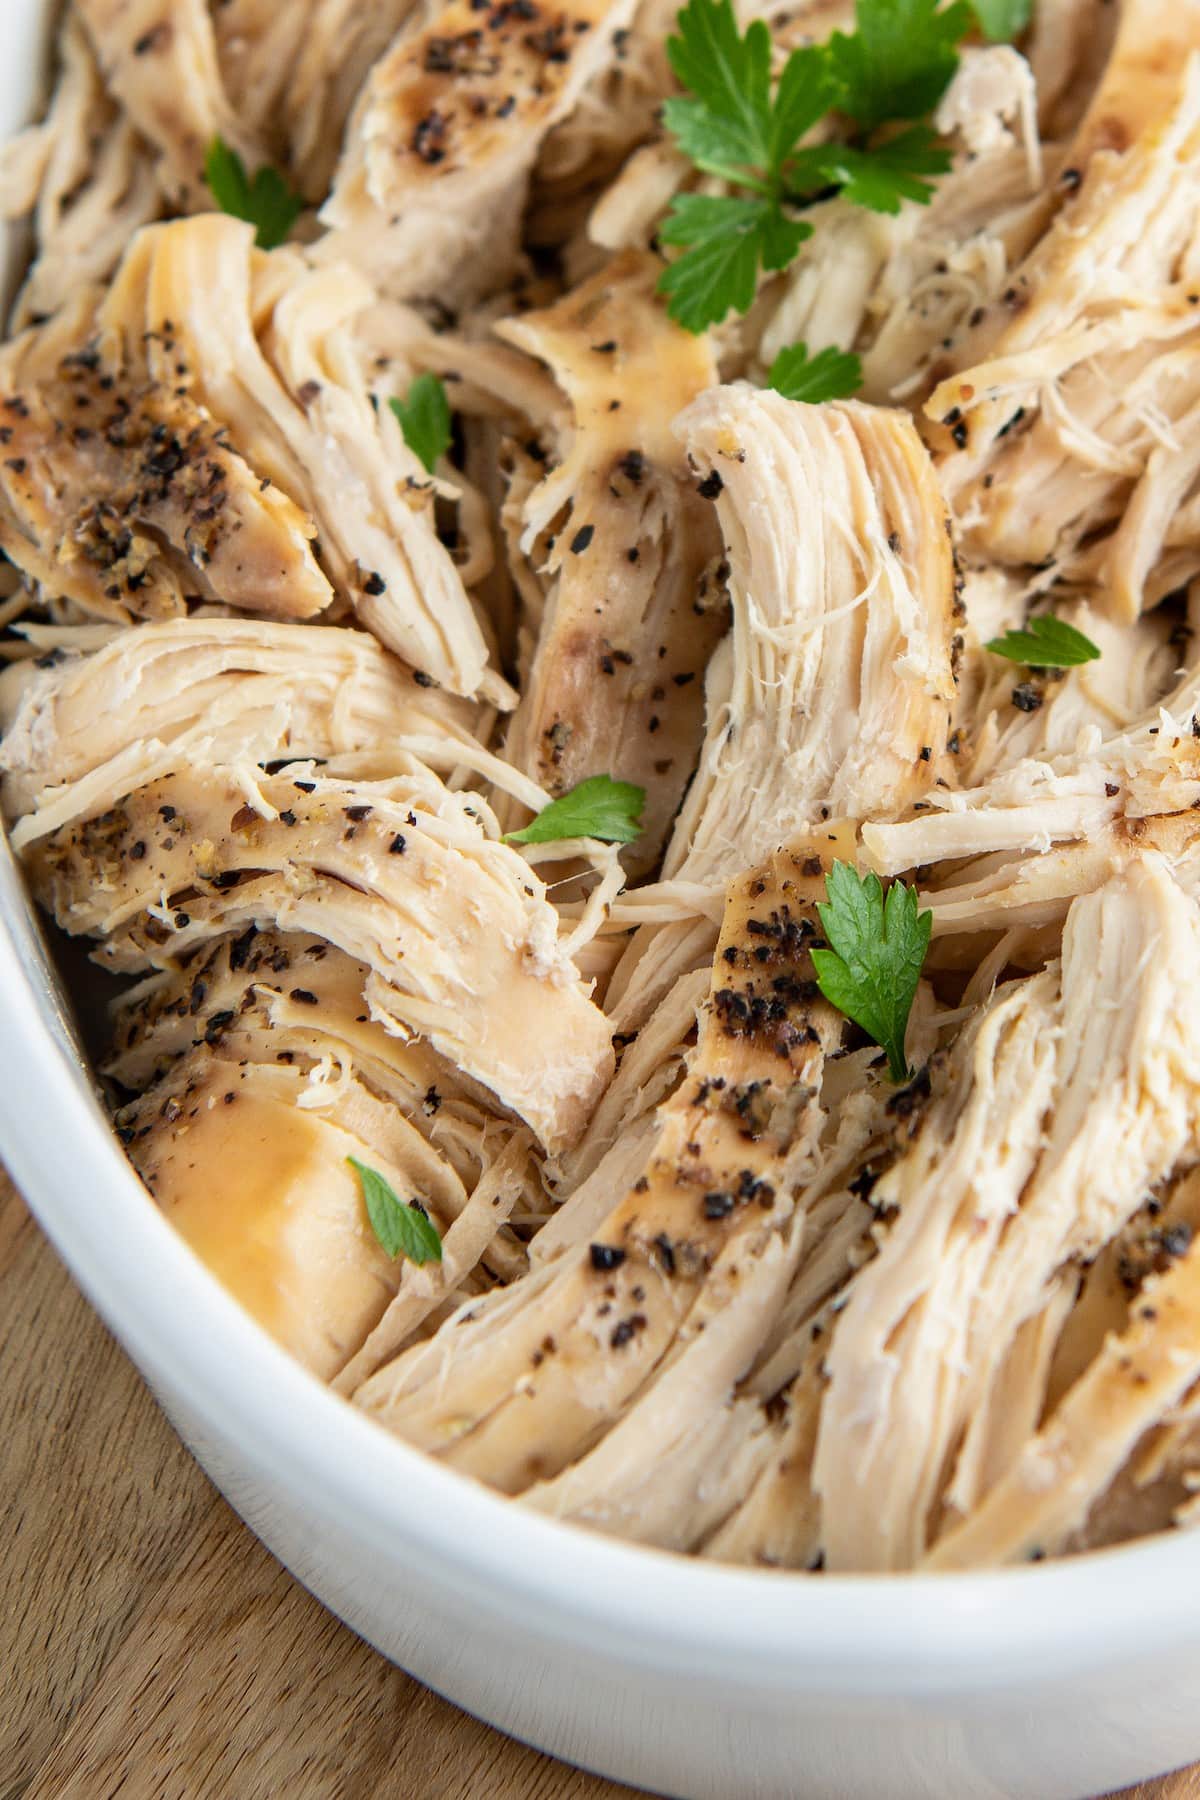 Pulled chicken breast with herbs.